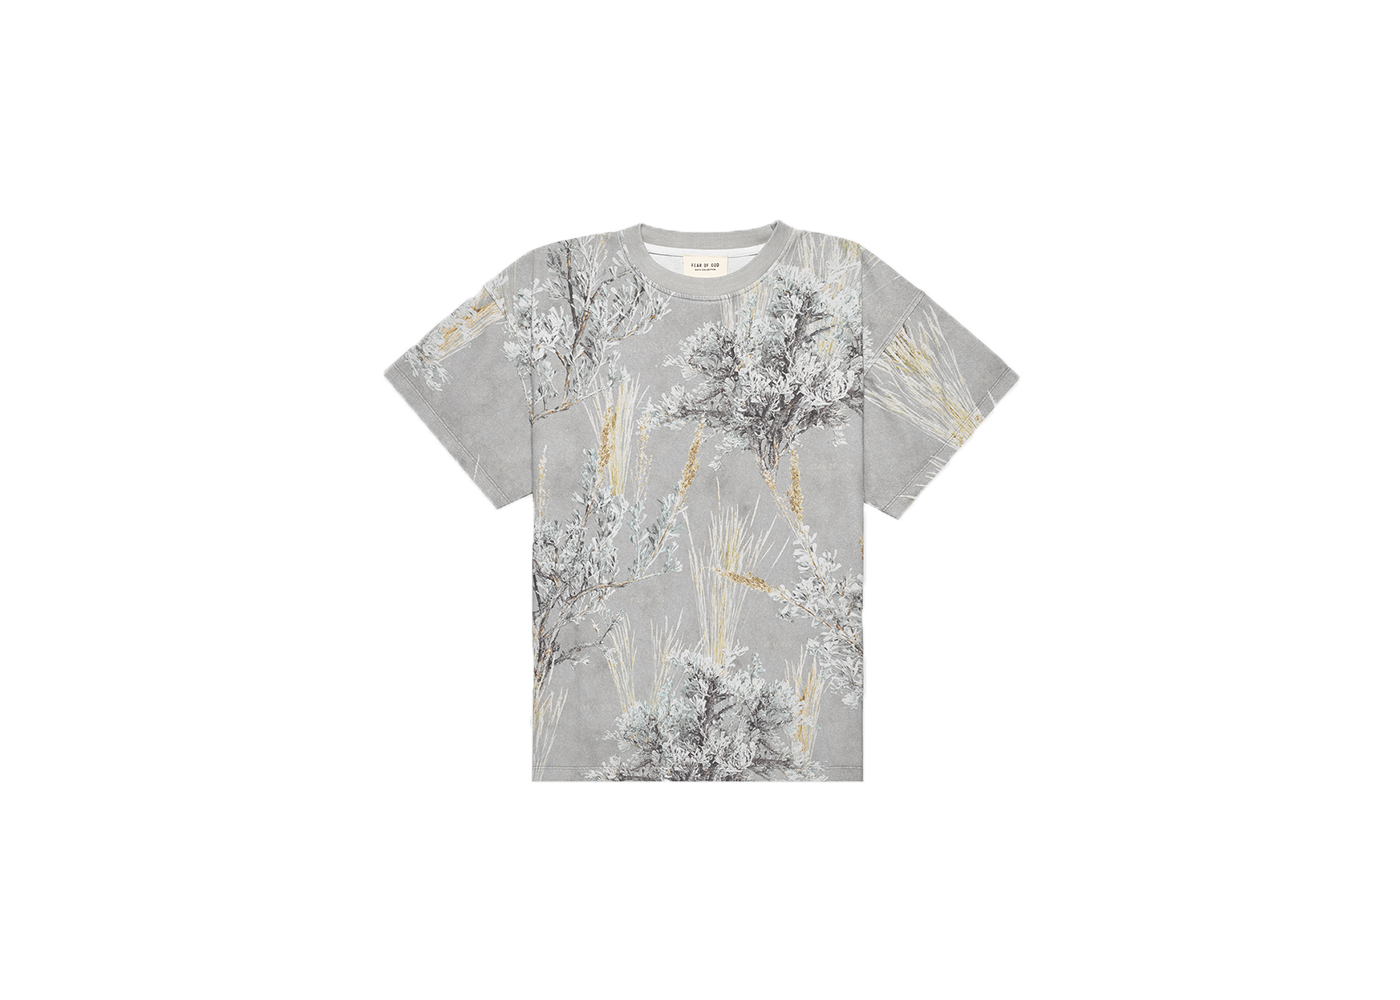 FEAR OF GOD Printed T-Shirt Prairie Ghost Camo - Sixth Collection - JP